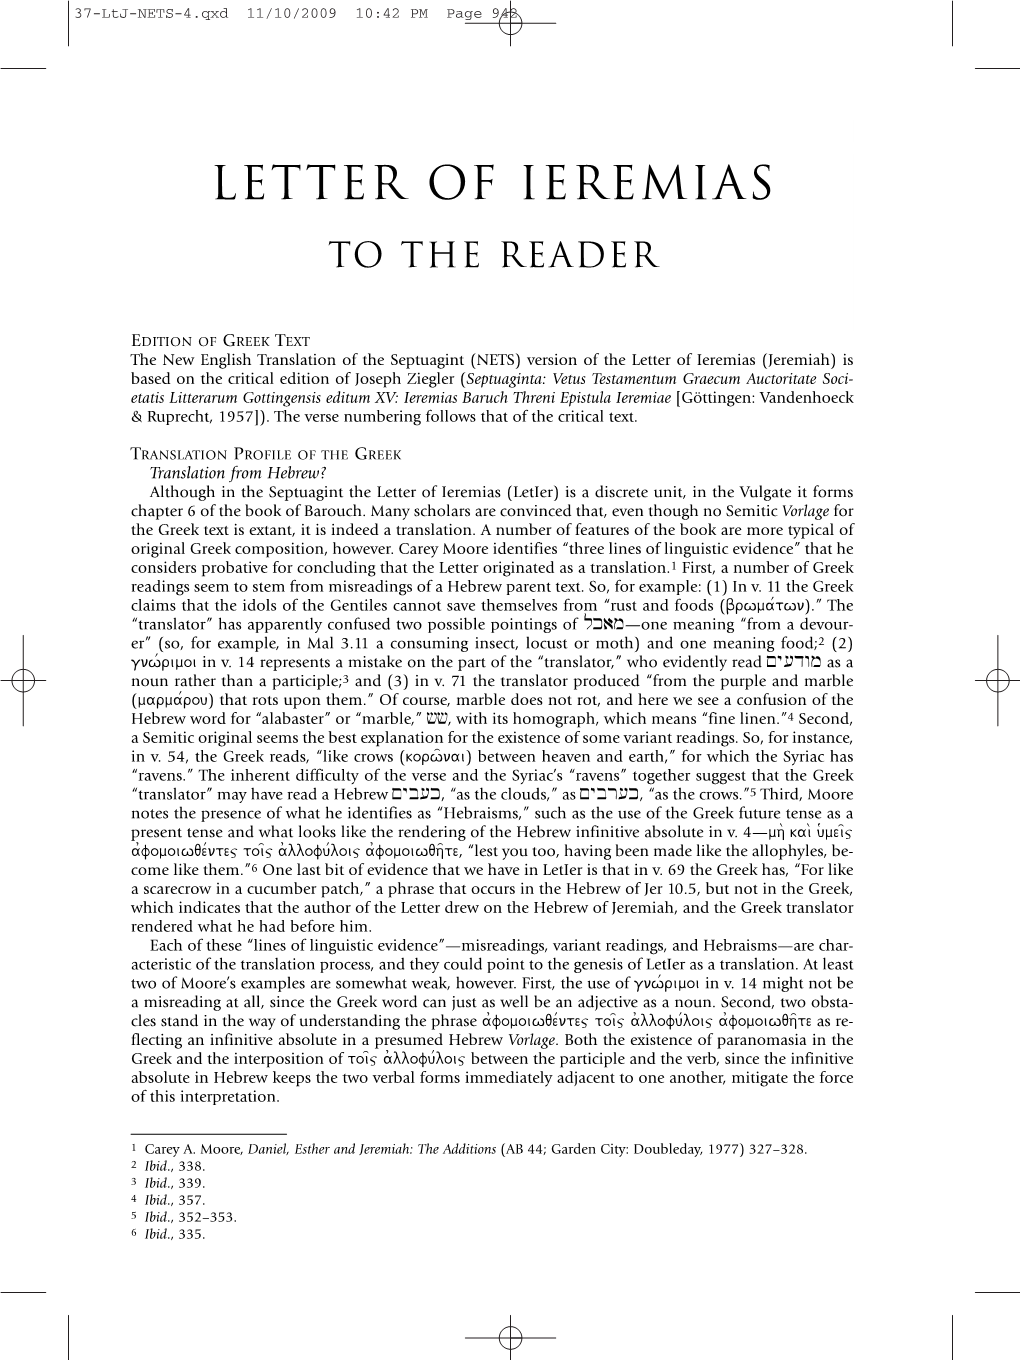 A New English Translation of the Septuagint. 37. Letter of Ieremias